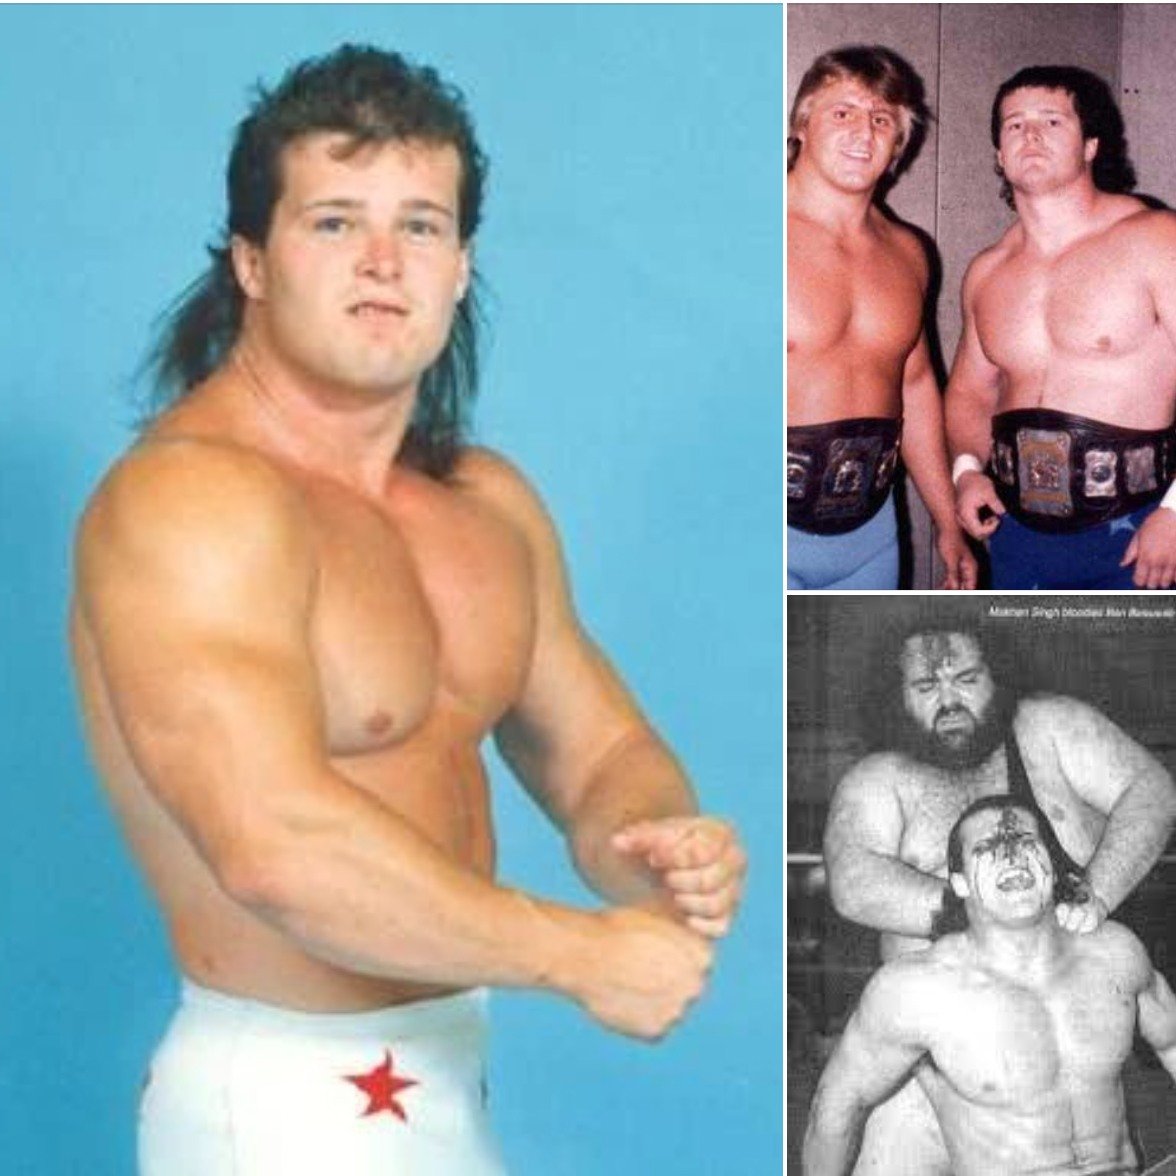 Ben Bassarab turns 64 today! 

The Canadian is a former bodybuilder and professional wrestler, best known for his appearances for Stu Hart's Stampede Wrestling promotion throughout the 1980s was born on this day in 1960.

#prowrestling #stampedewrestling